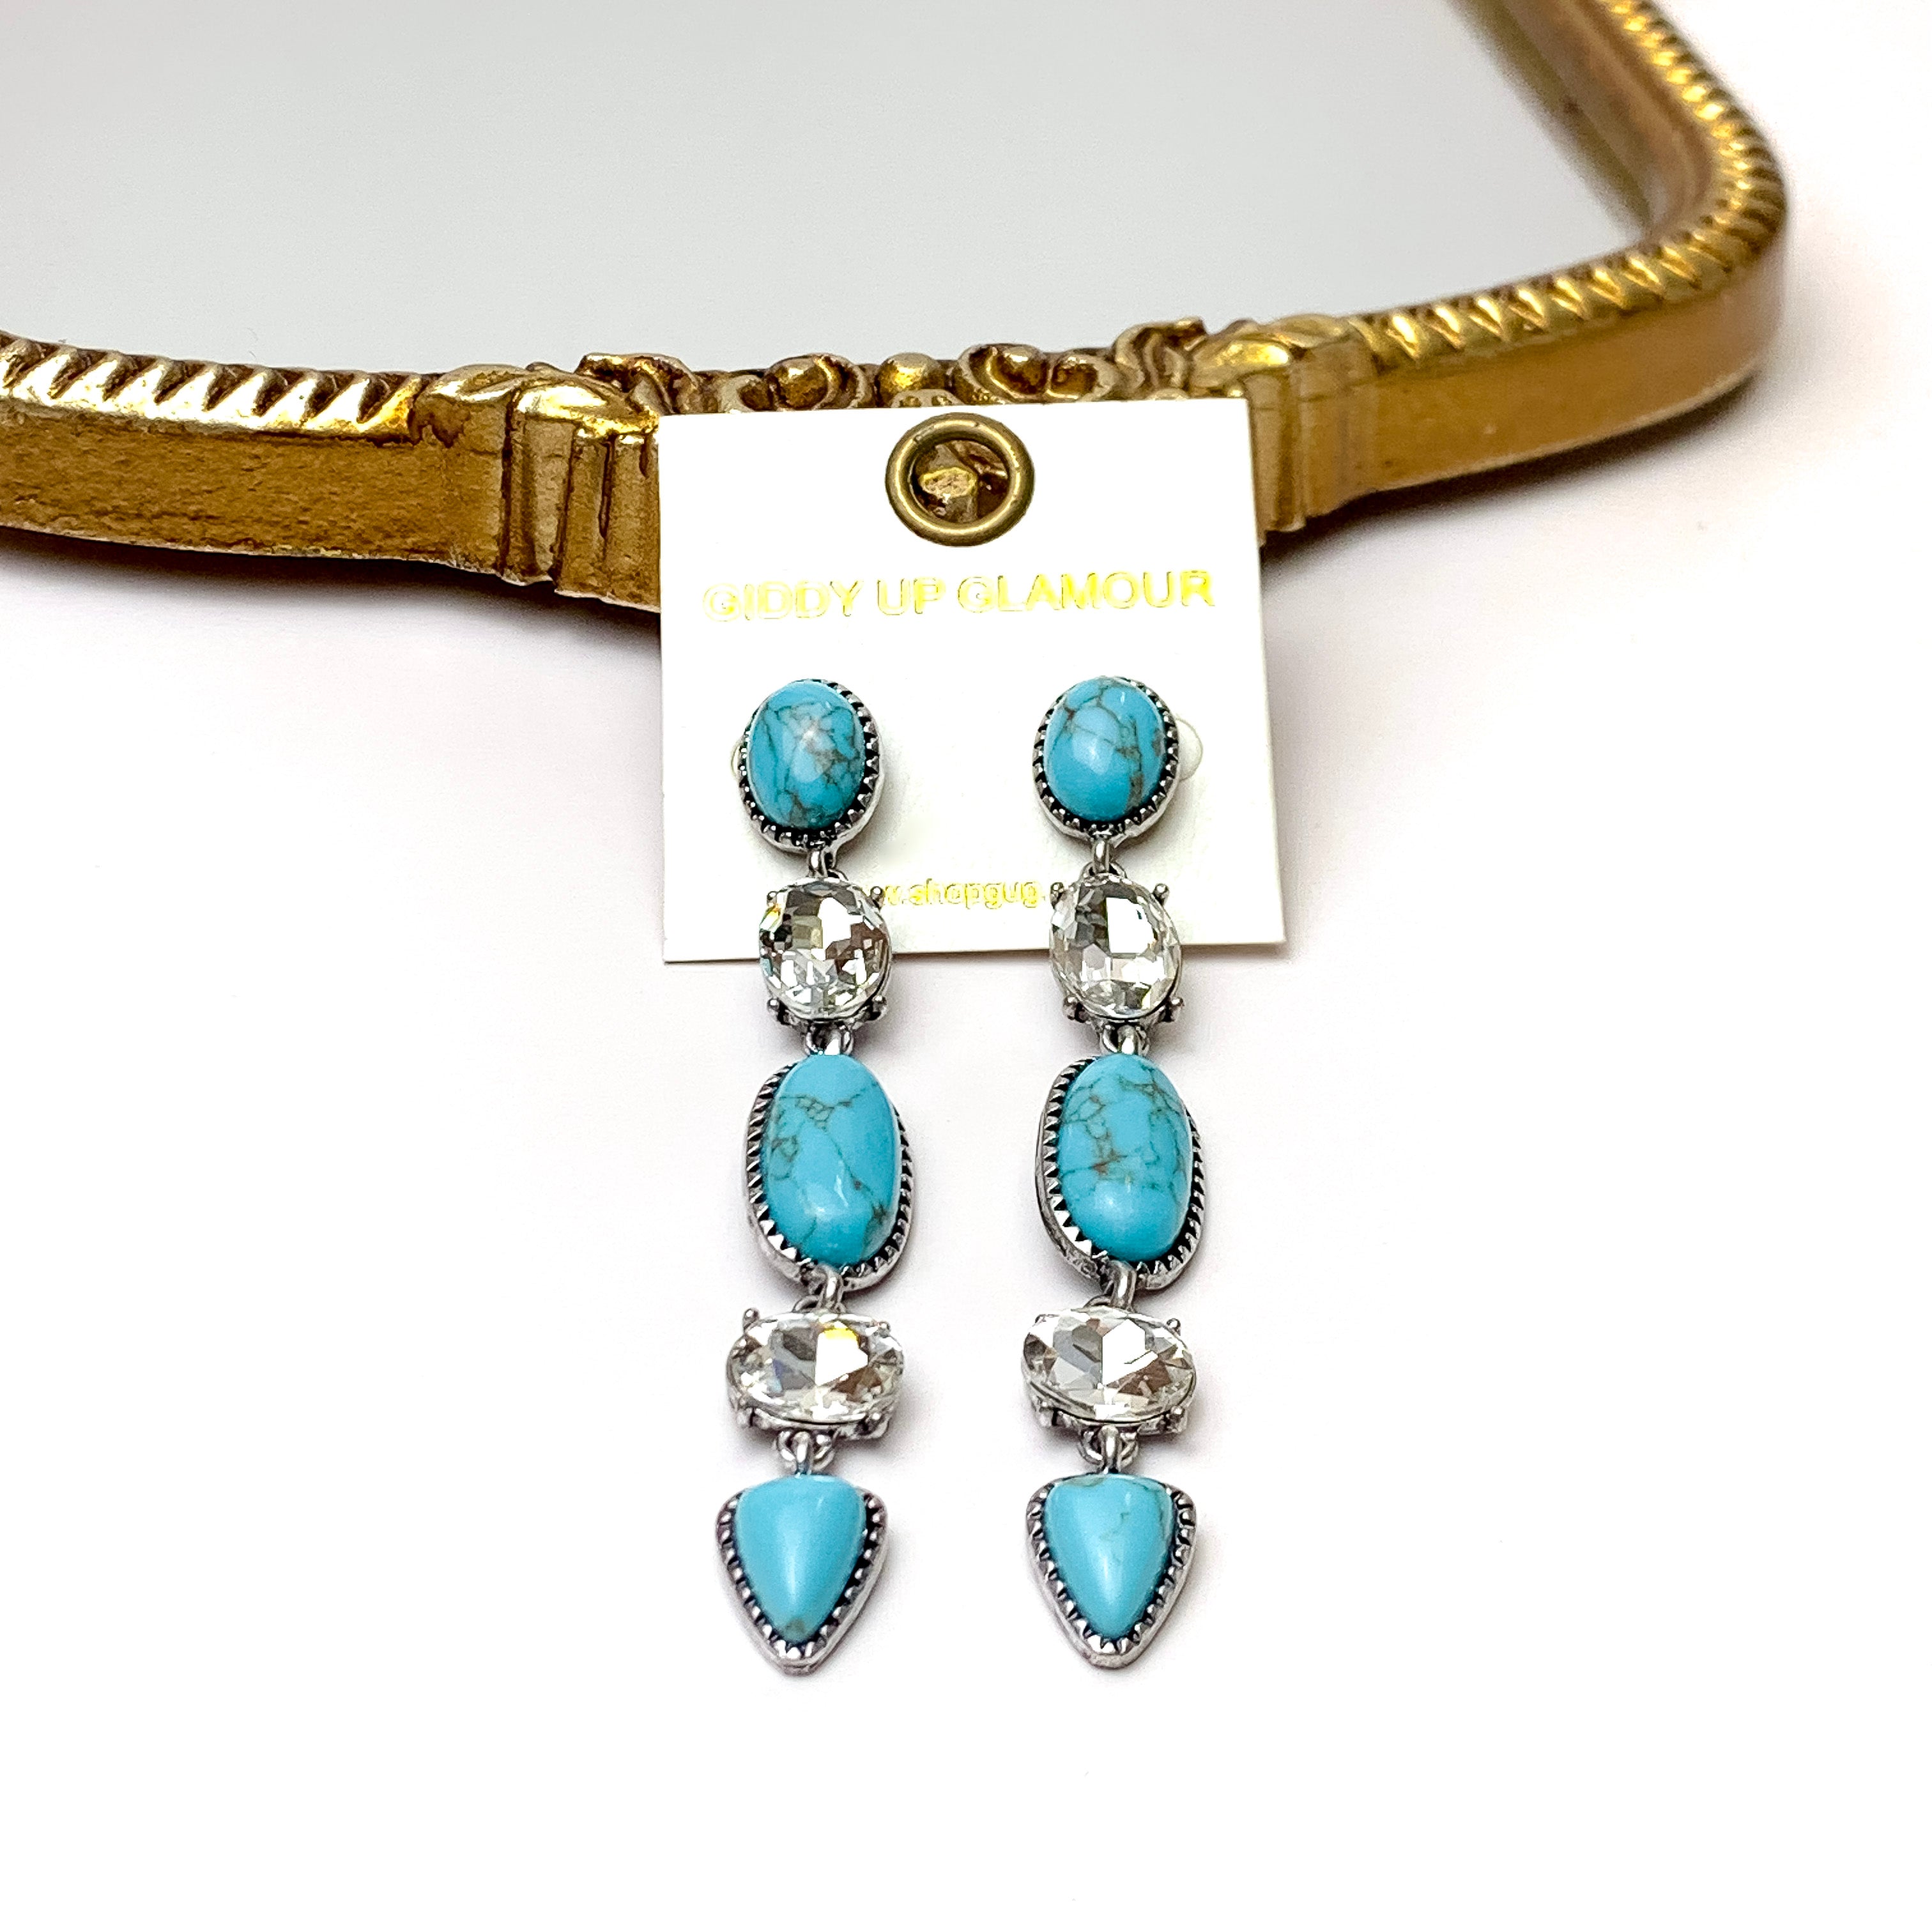 5 Tier Faux Turquoise and Clear Crystal Dangle Earrings - Giddy Up Glamour Boutique